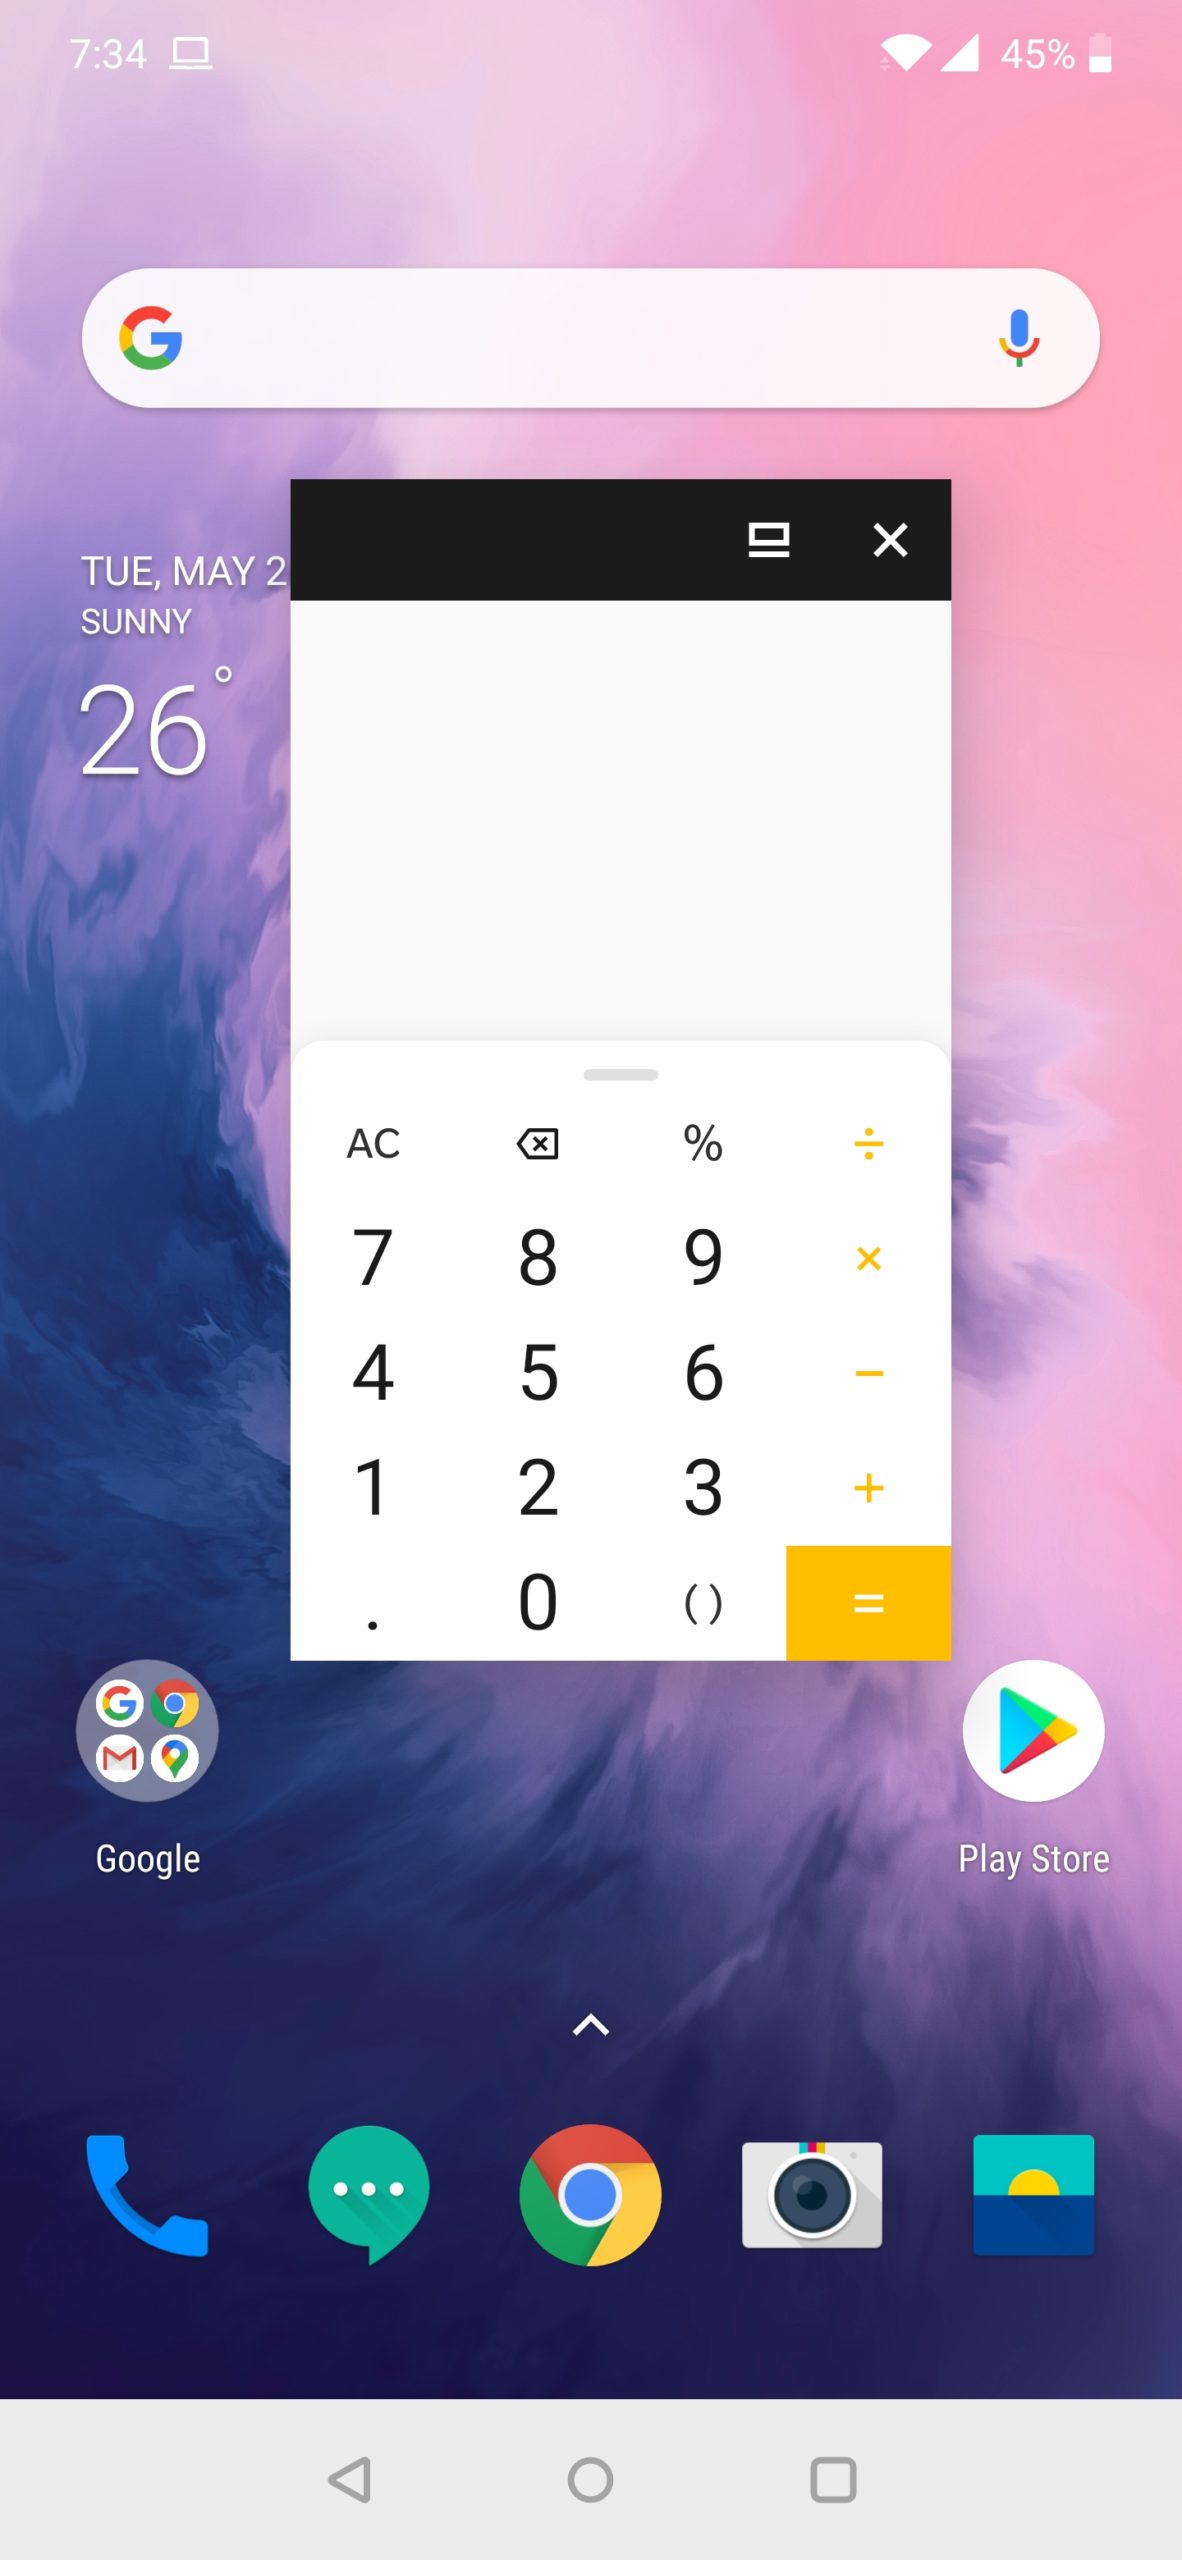 https://www.androidworld.it/wp-content/uploads/2020/05/oneplus-launcher-app-switcher-new-3.jpg